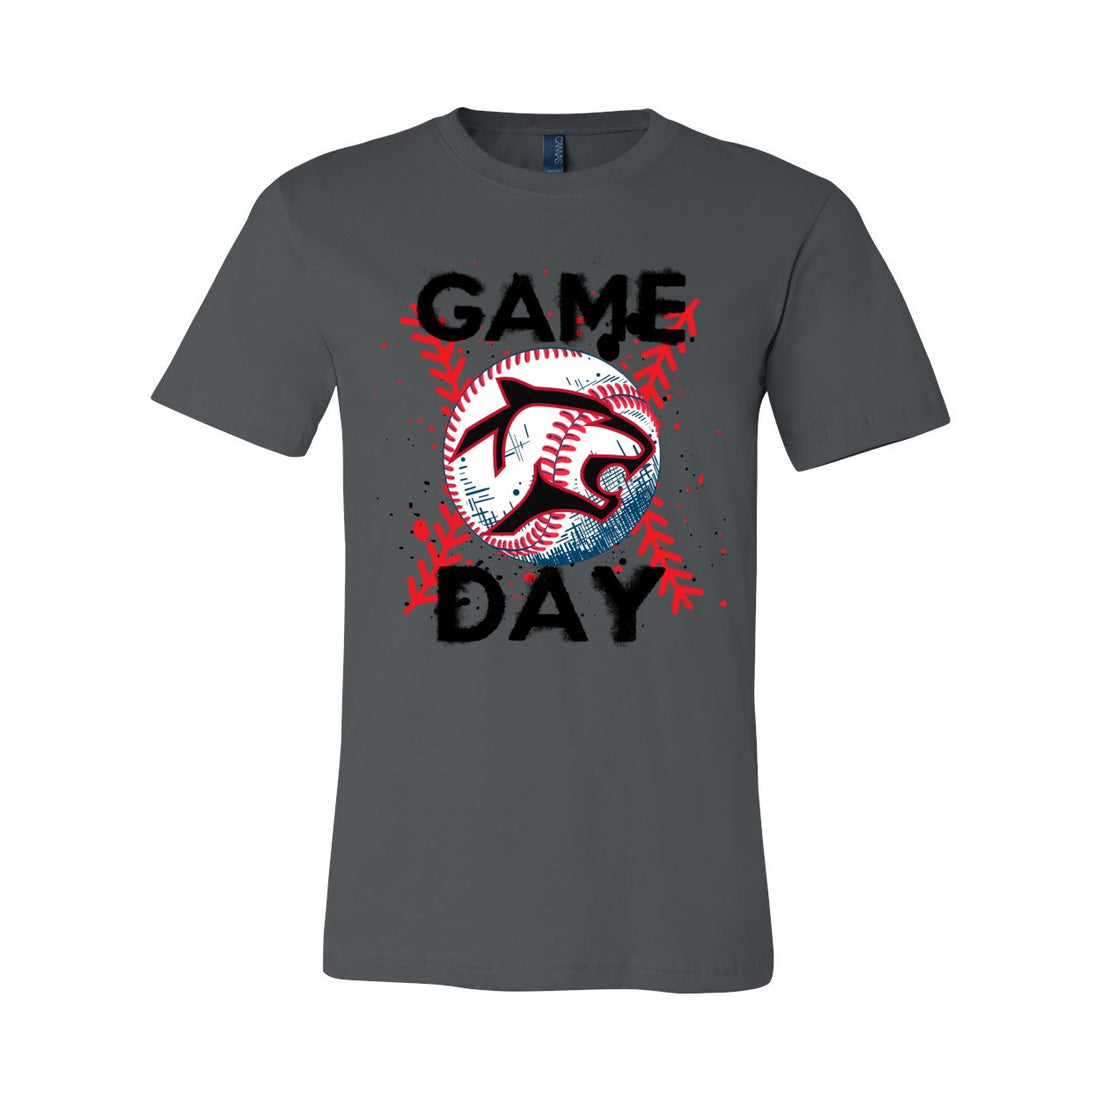 Panther Baseball Game Day - T-Shirts - Positively Sassy - Panther Baseball Game Day